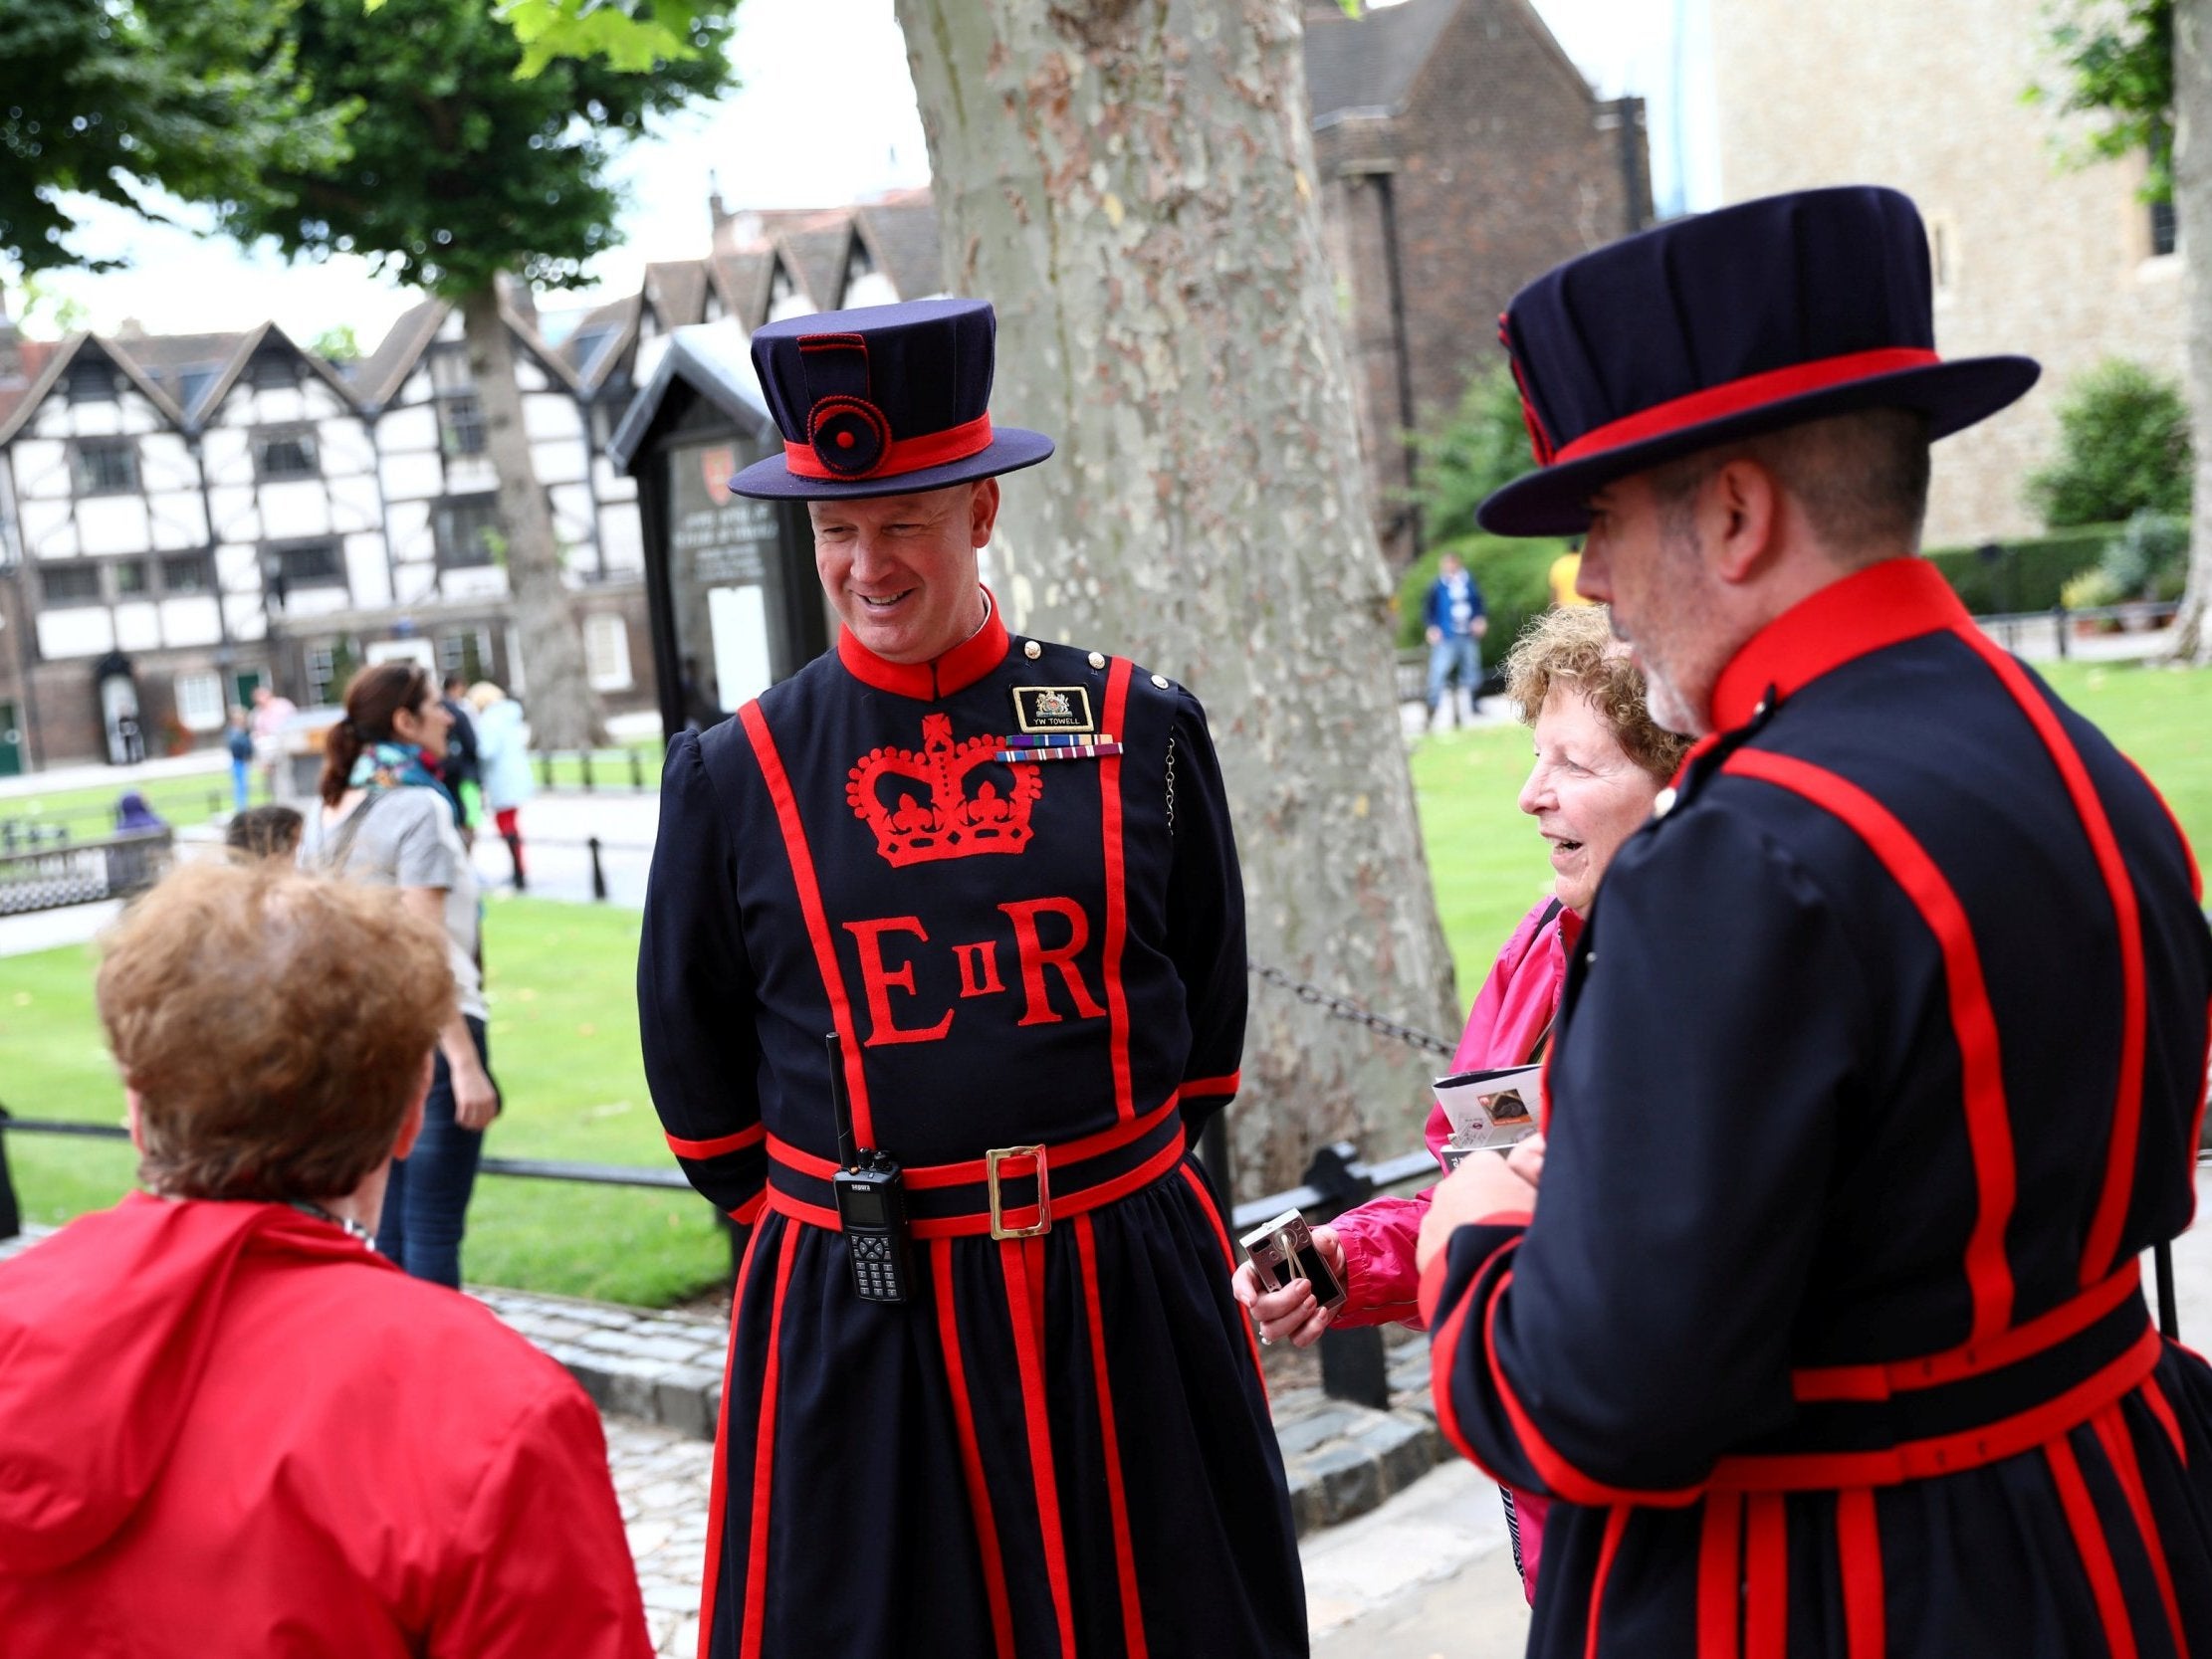 &#13;
Yeoman Warders, commonly called Beefeaters, at the Tower of London (Reuters)&#13;